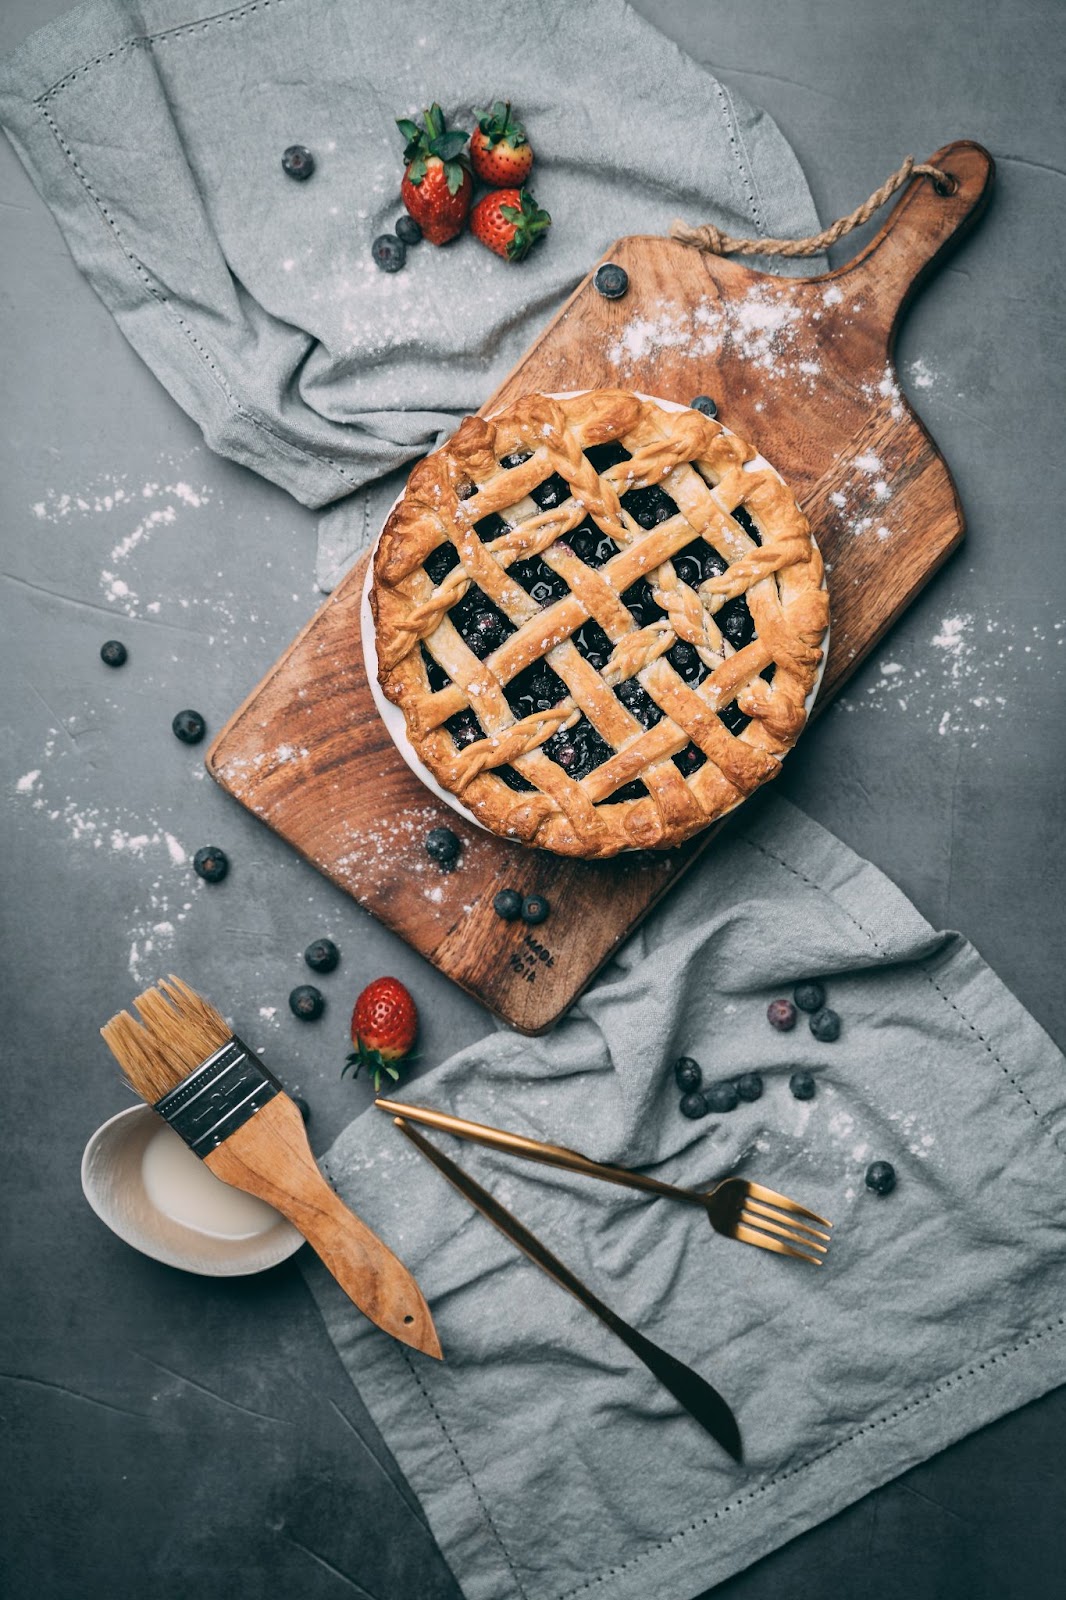 Pie Recipes From Around The World